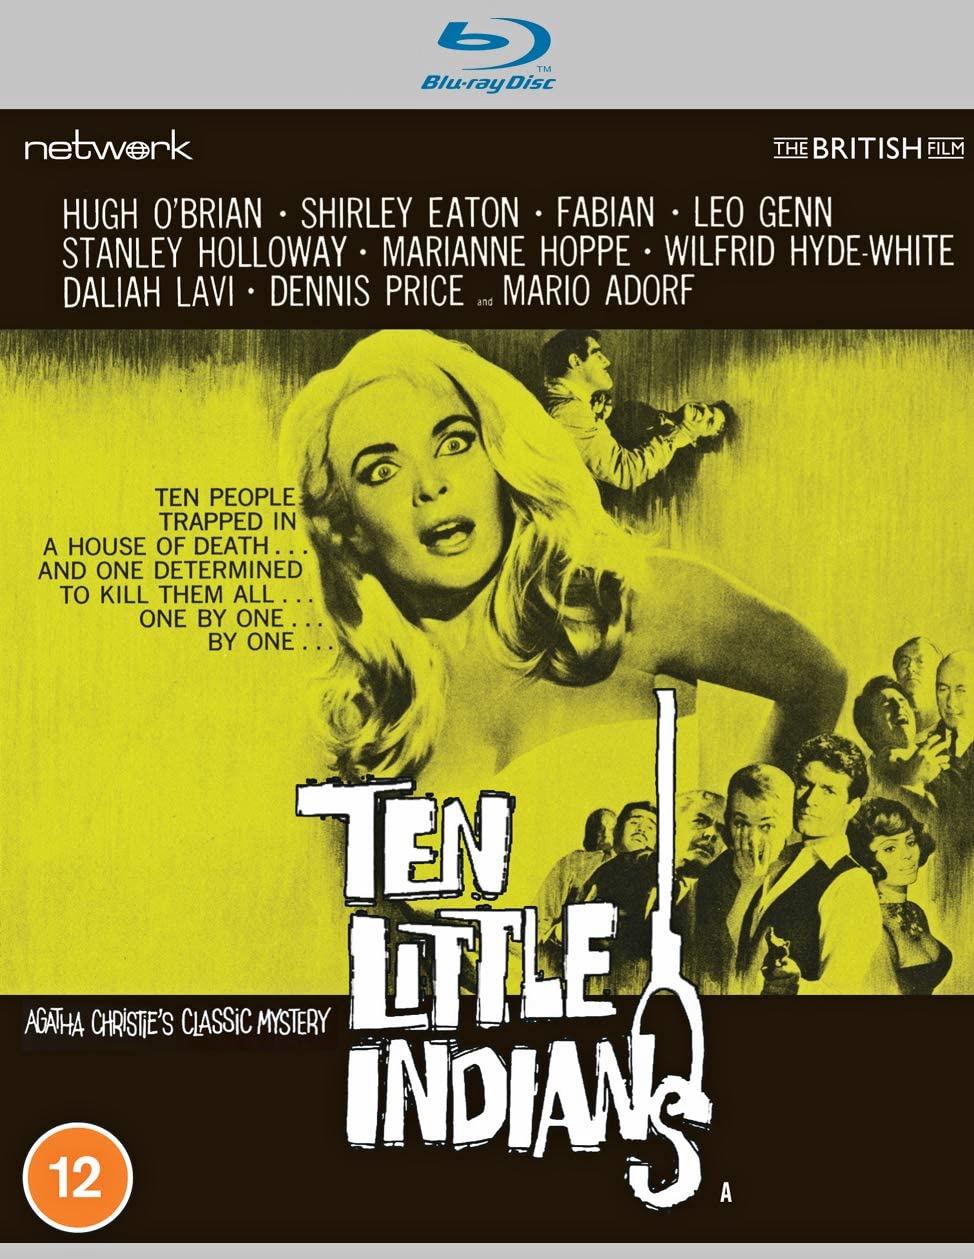 Ten Little Indians (1965) Blu-ray cover from Network Distributing and the British Film [2021] (1) featuring Shirley Eaton